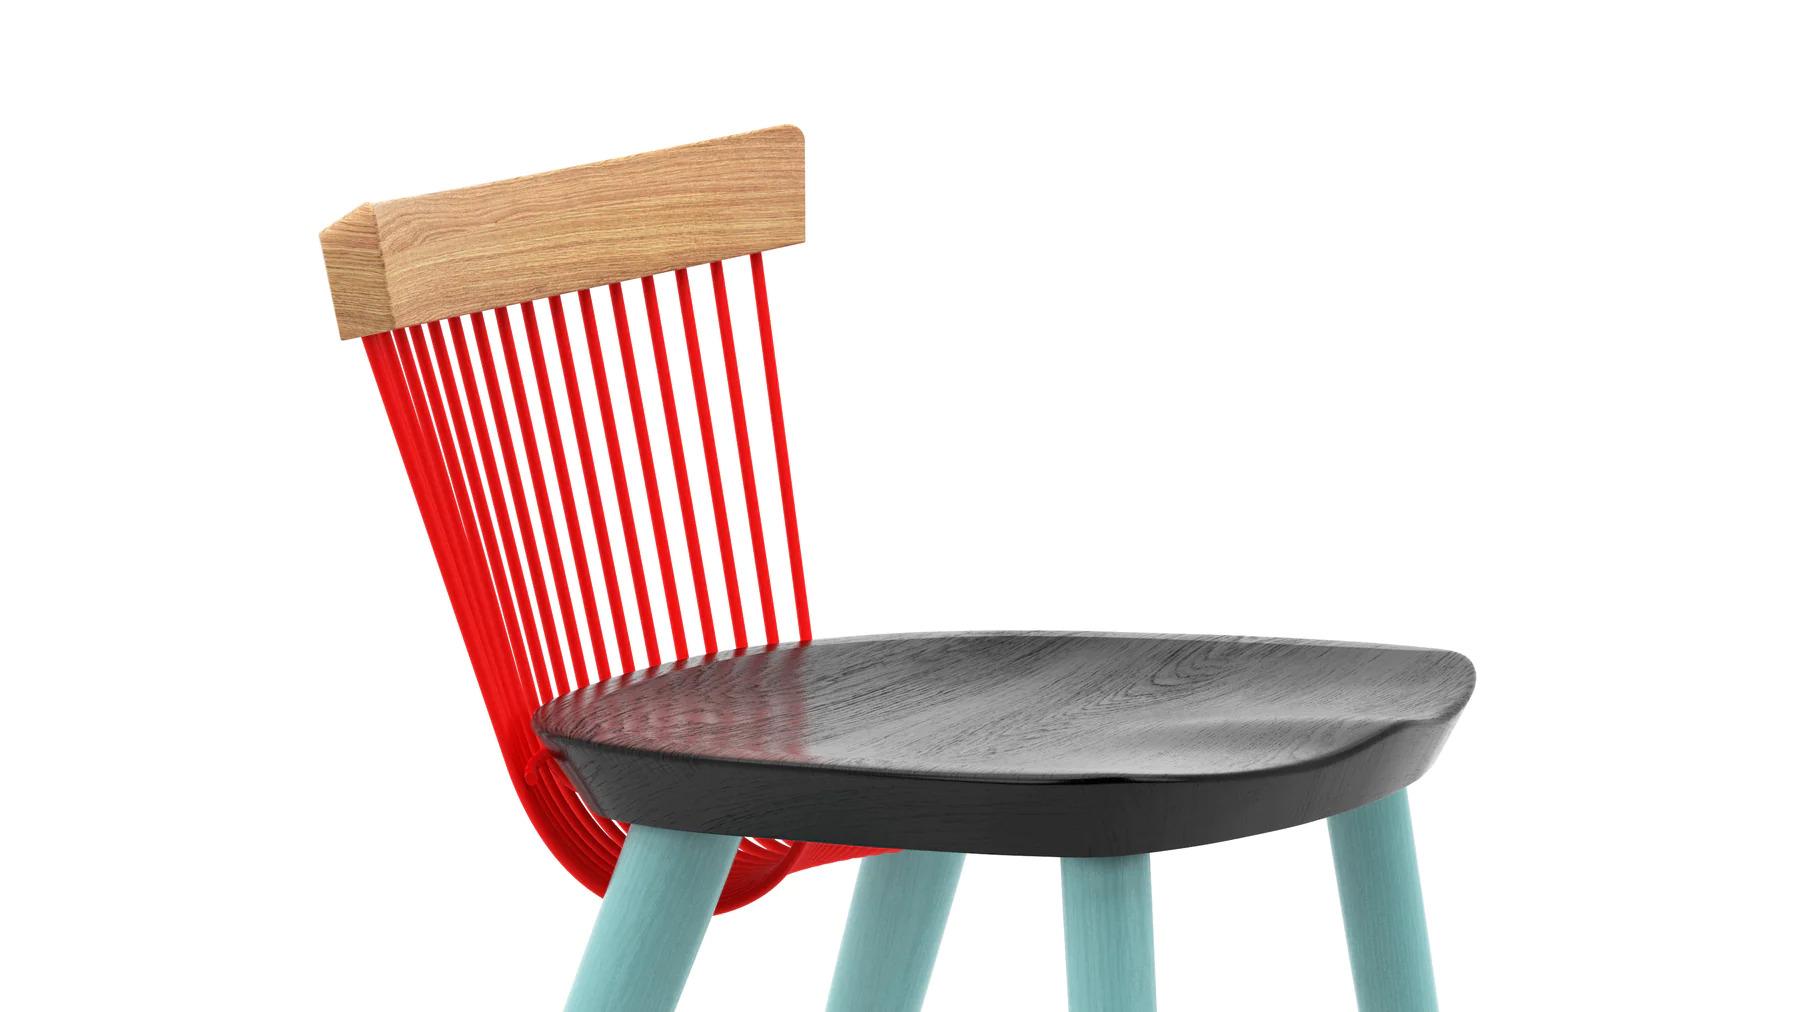 Based on a modern Windsor design, the WW counter stool, where the first 'W' stands for Windsor and the second for Wire is an iconic piece of furniture. Produced from solid oak with the unique 'wire' backrest formed from mild steel rods which are